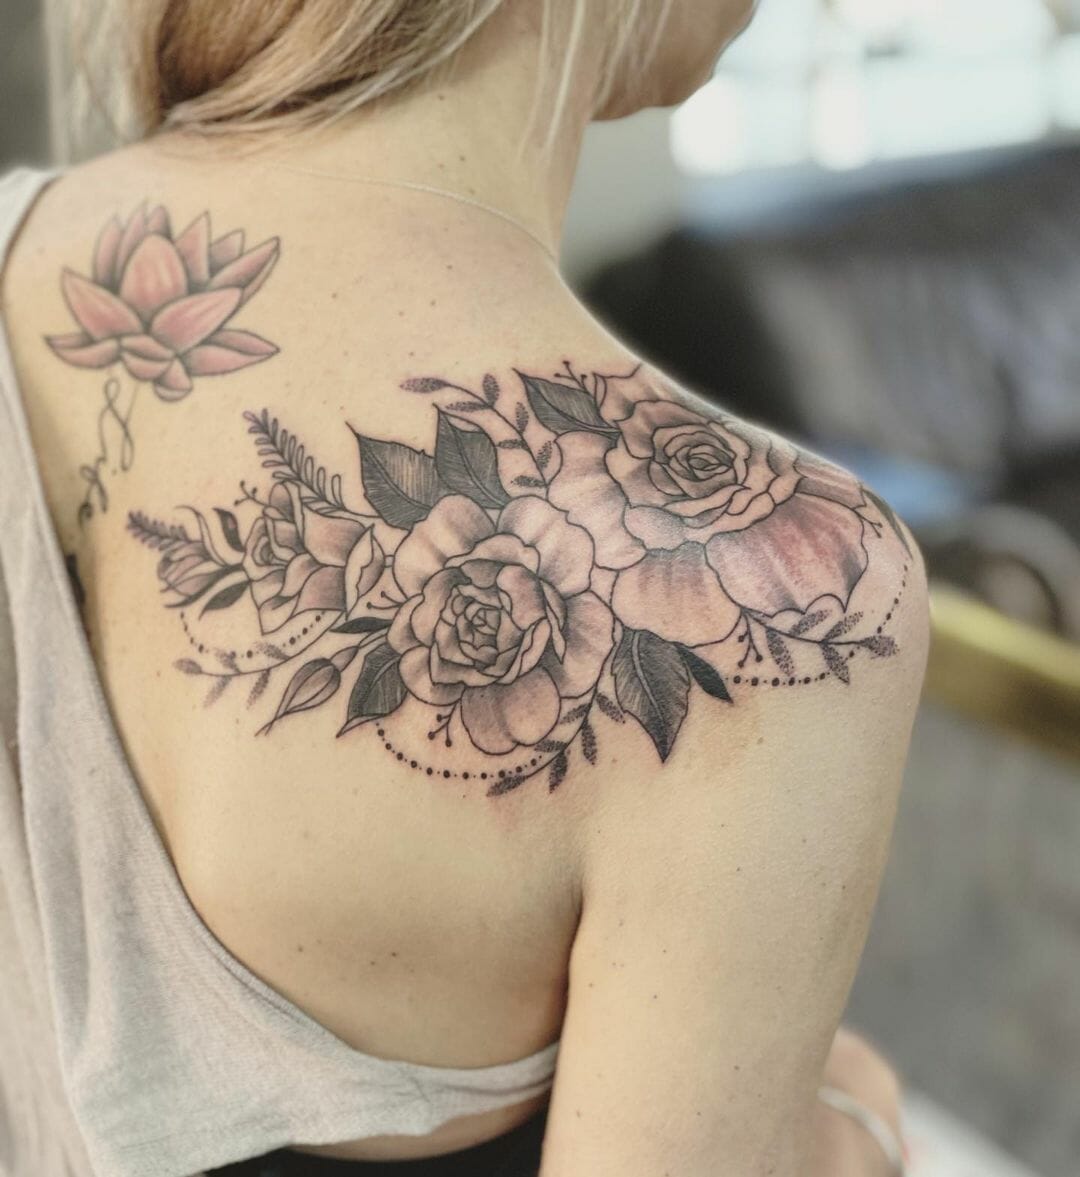 101 Best Flower Shoulder Tattoo Ideas You Have To See To Believe! - Outsons